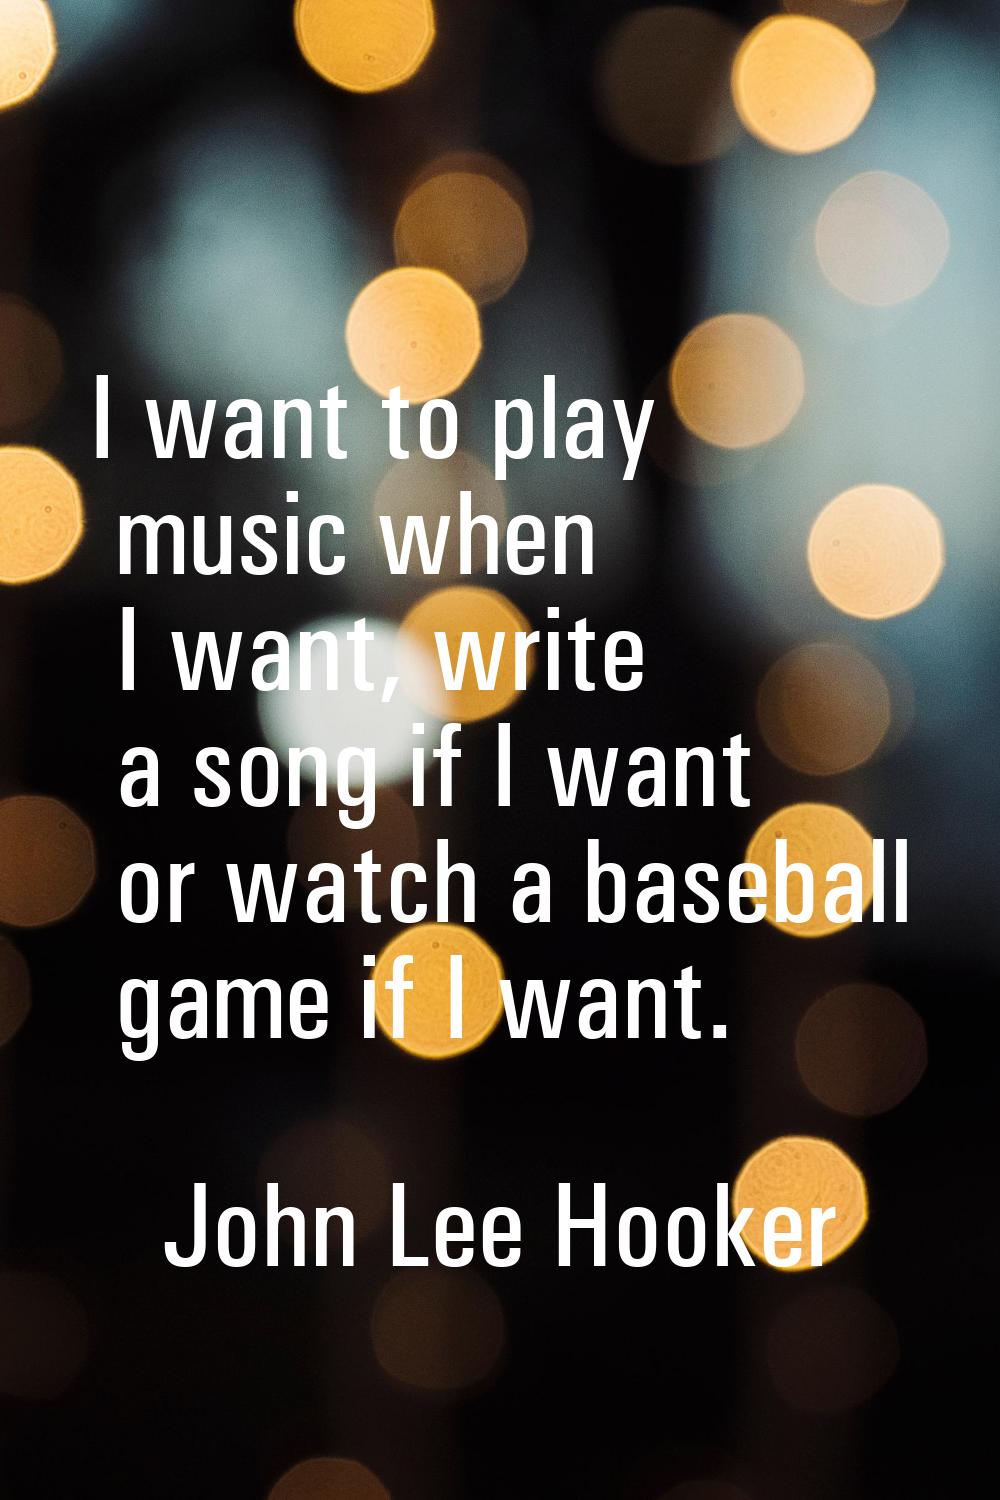 I want to play music when I want, write a song if I want or watch a baseball game if I want.